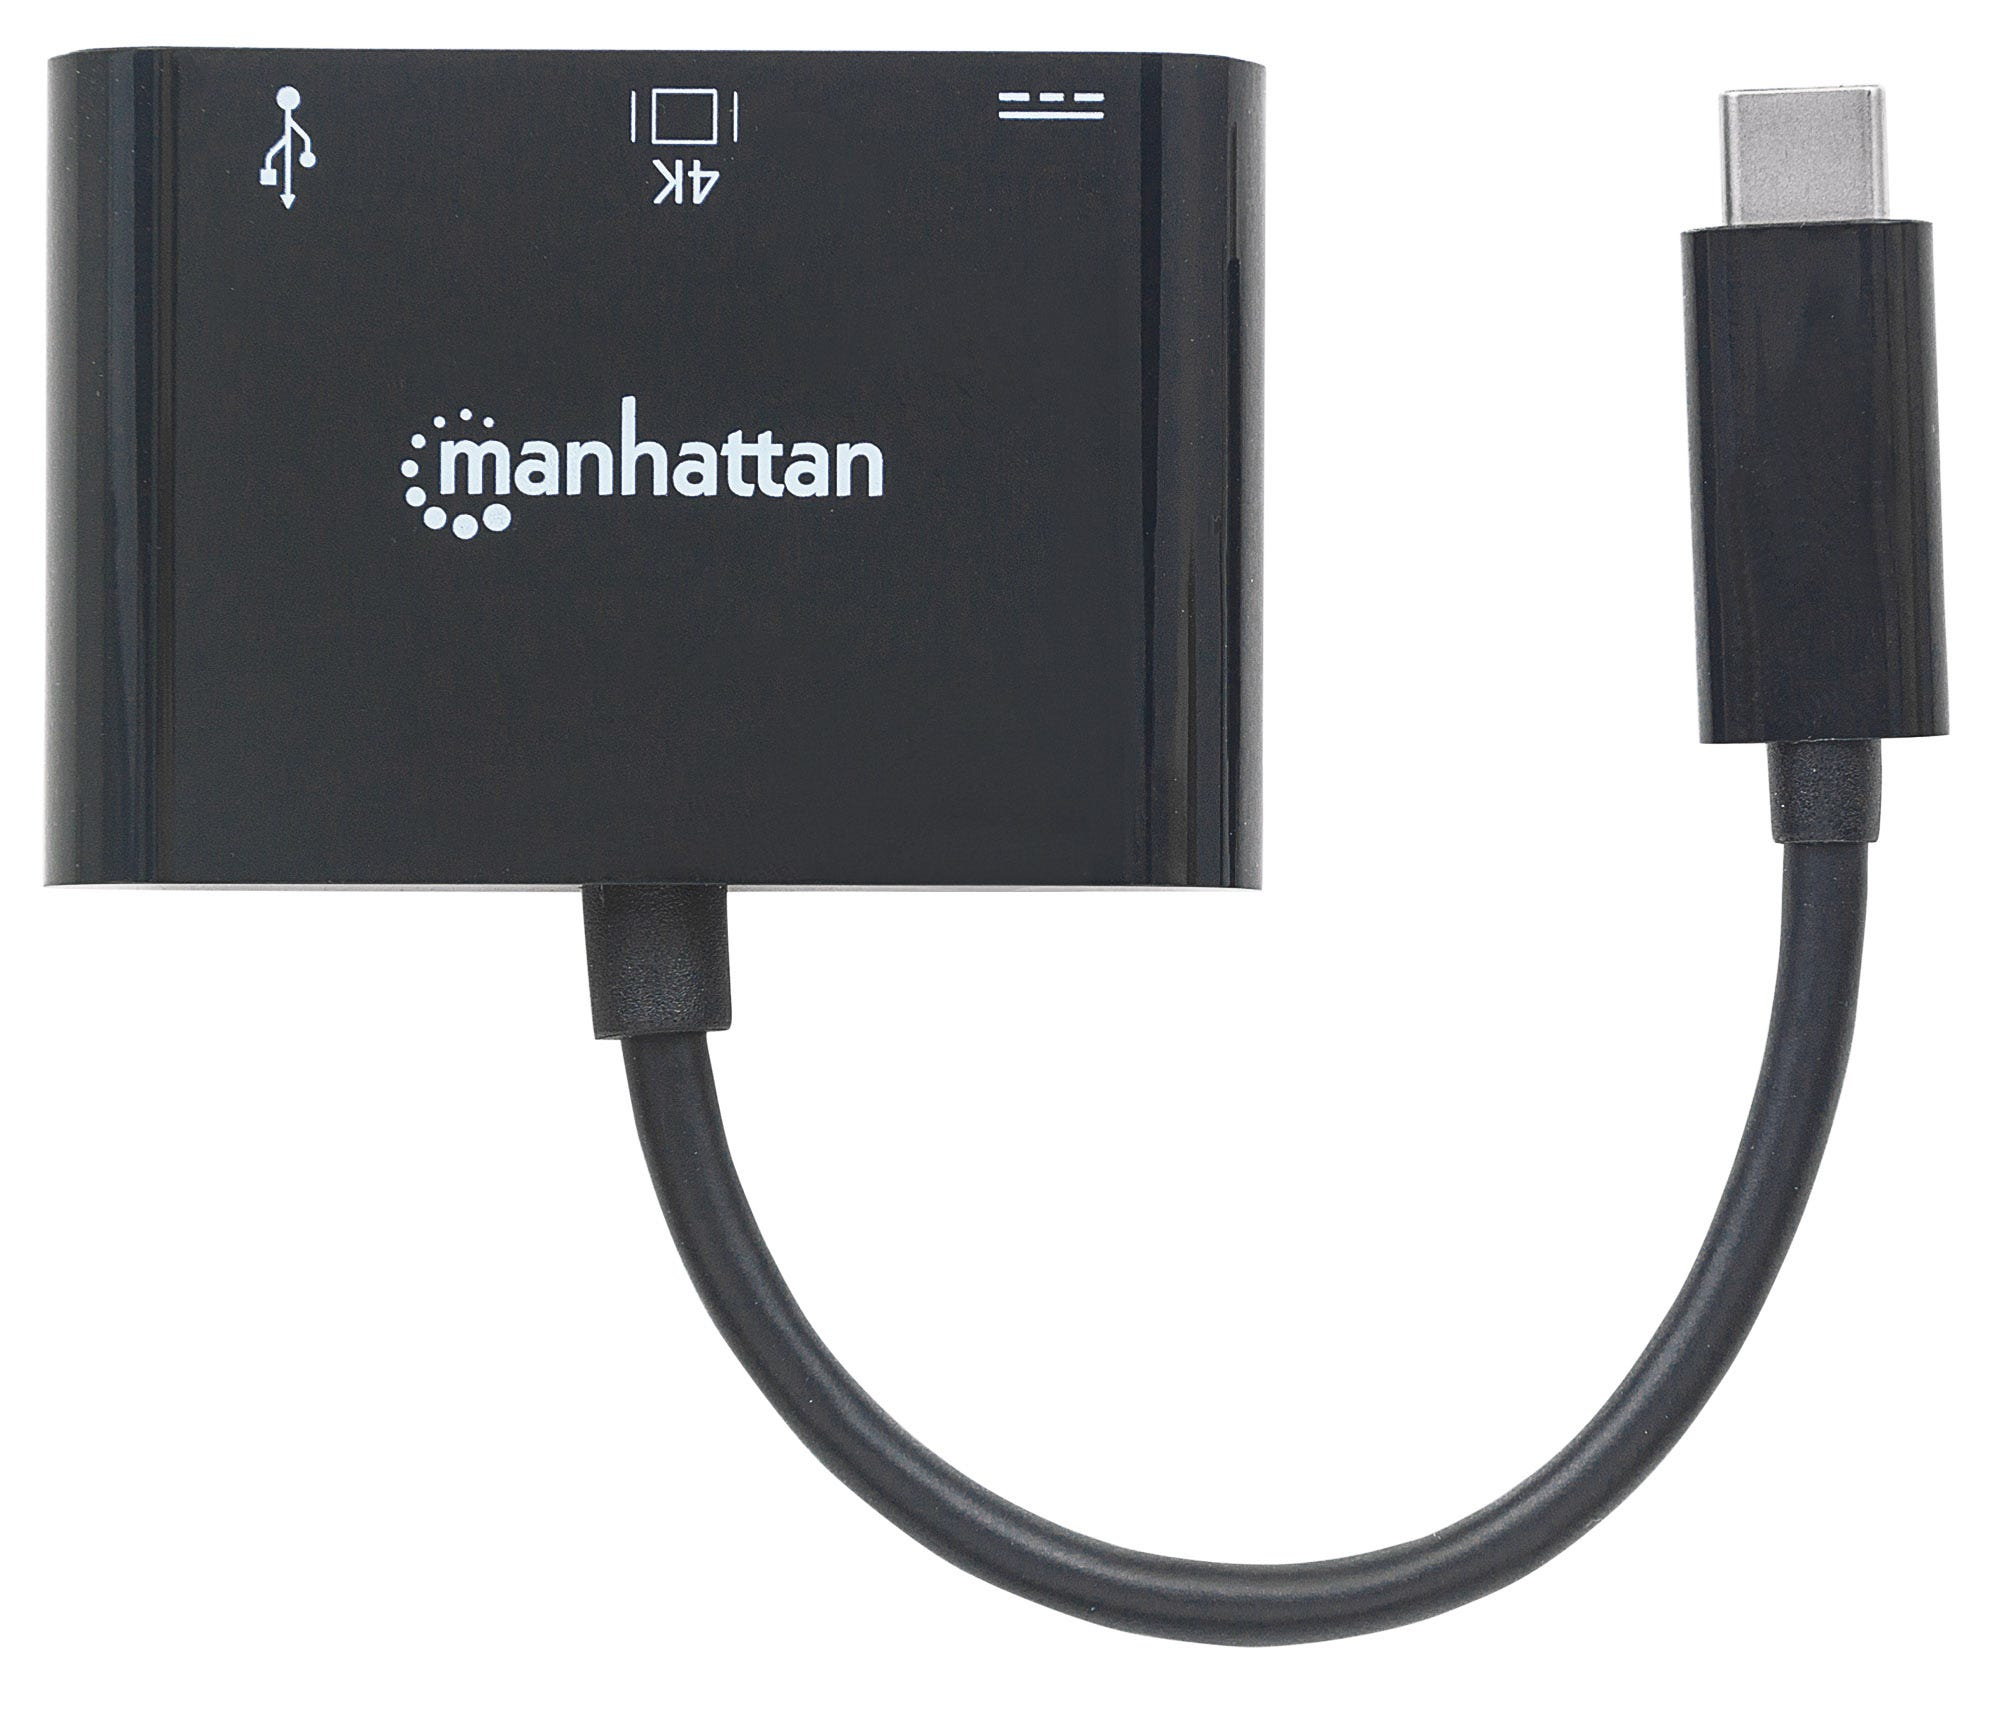 Manhattan USB-C 3-Port Hub/Dock/Converter, USB-C to HDMI, USB-C (including Power Delivery) and USB-A Ports, 5 Gbps (USB 3.2 Gen1 aka USB 3.0), HDMI 4K video: 1080p@60Hz or 3840x2160p@30Hz, Male to Females, Cable 8cm, Black, Blister